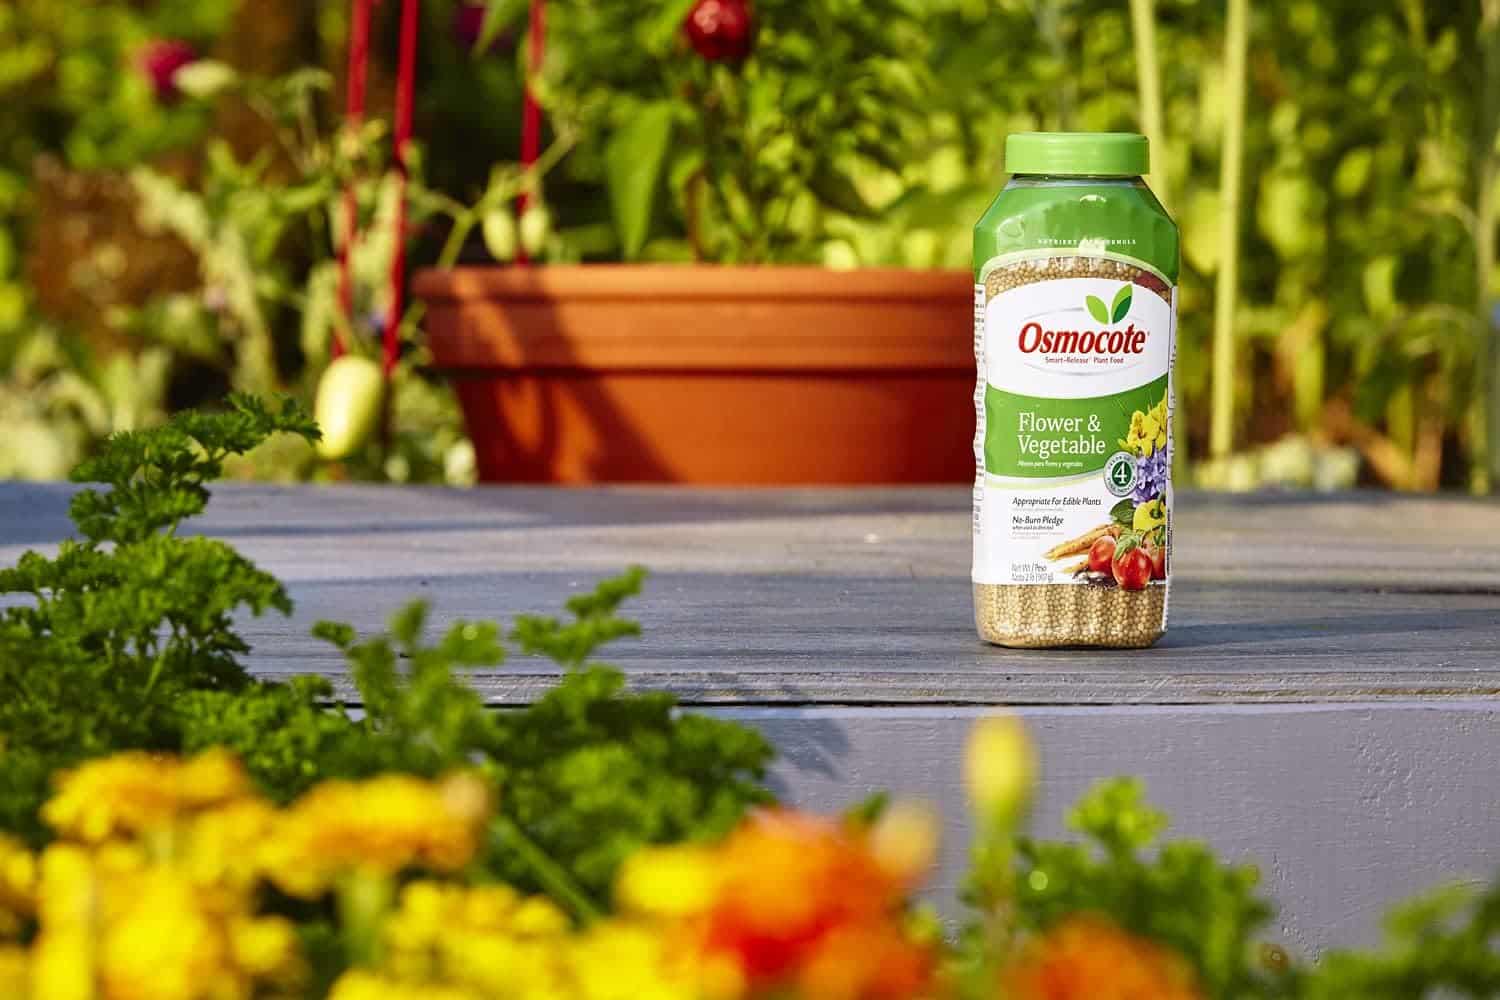 Osmocote Smart-Release Plant Food Flower & Vegetable: A Review